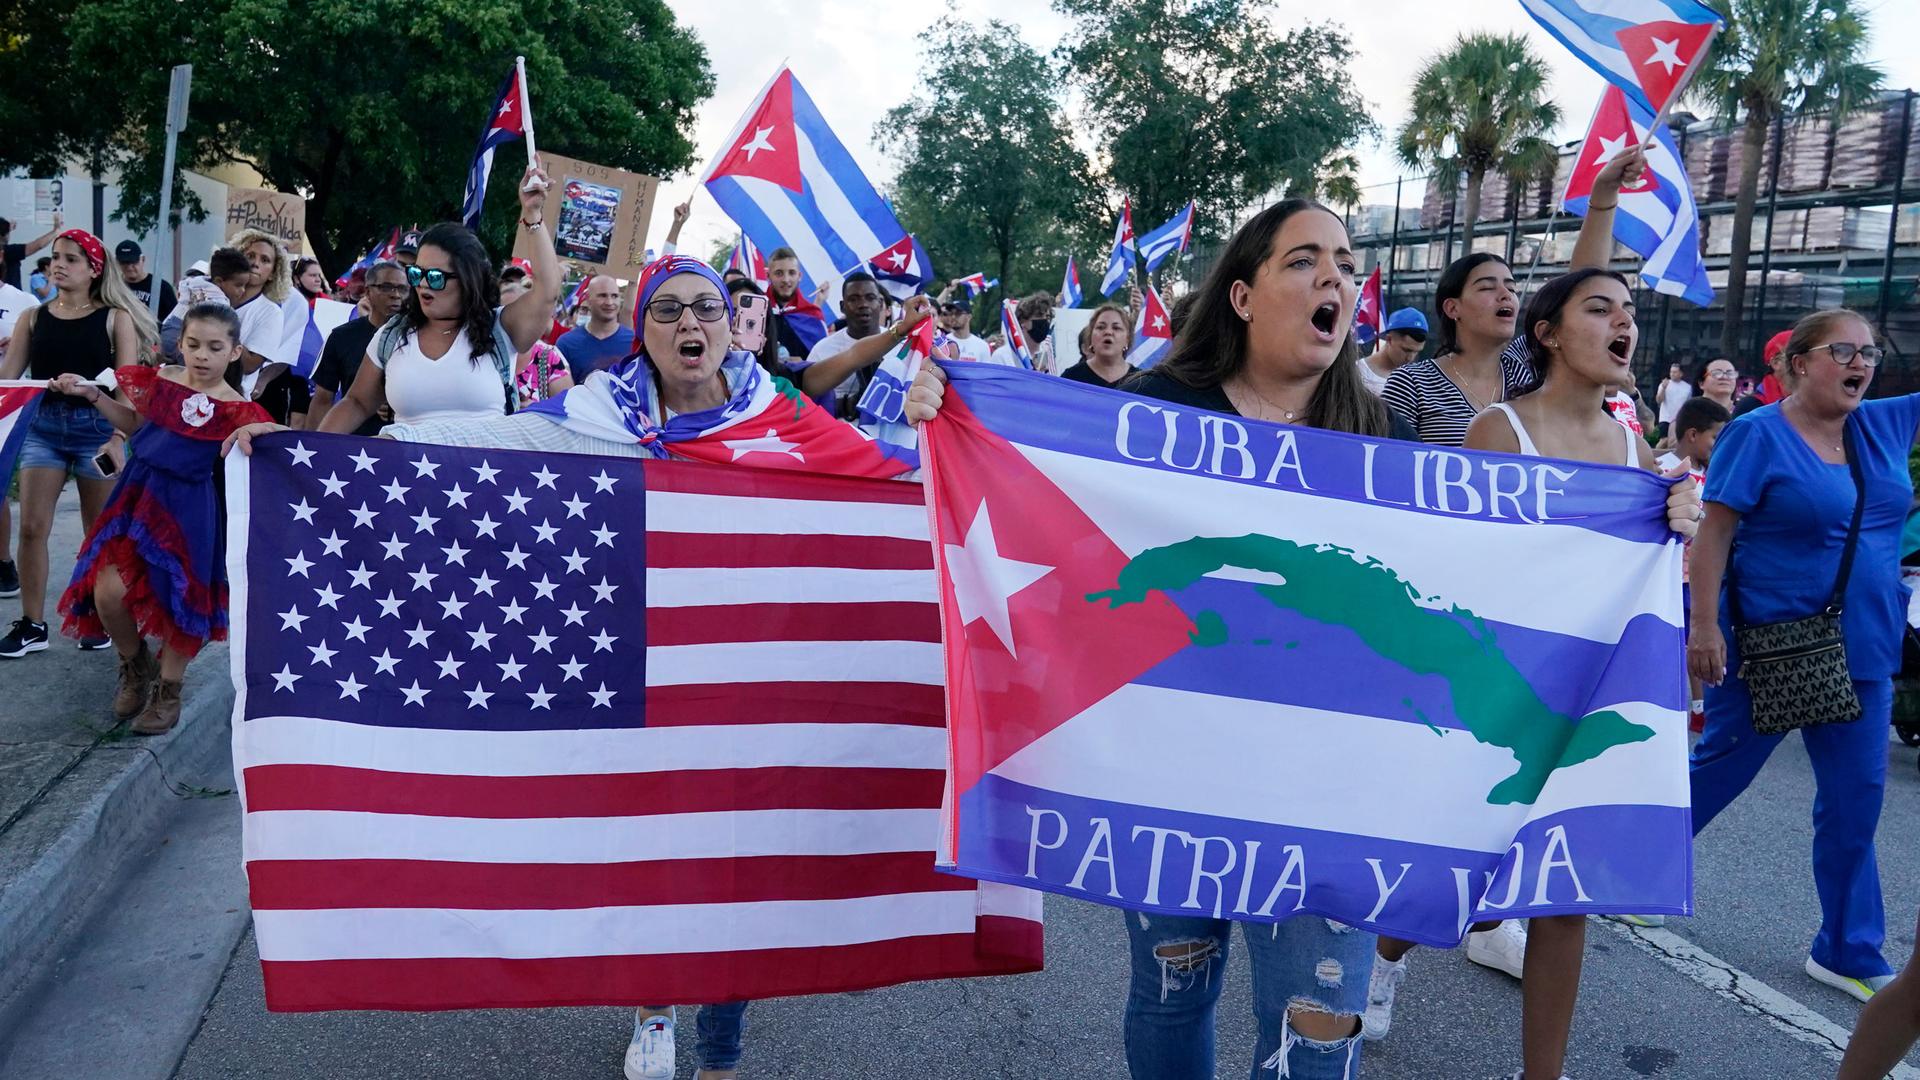 Demonstrators shout their solidarity with the Cuban people against the communist government, Thursday, July 15, 2021, in Hialeah, Florida. Hialeah has the greatest concentration of Cuban exiles in the US.